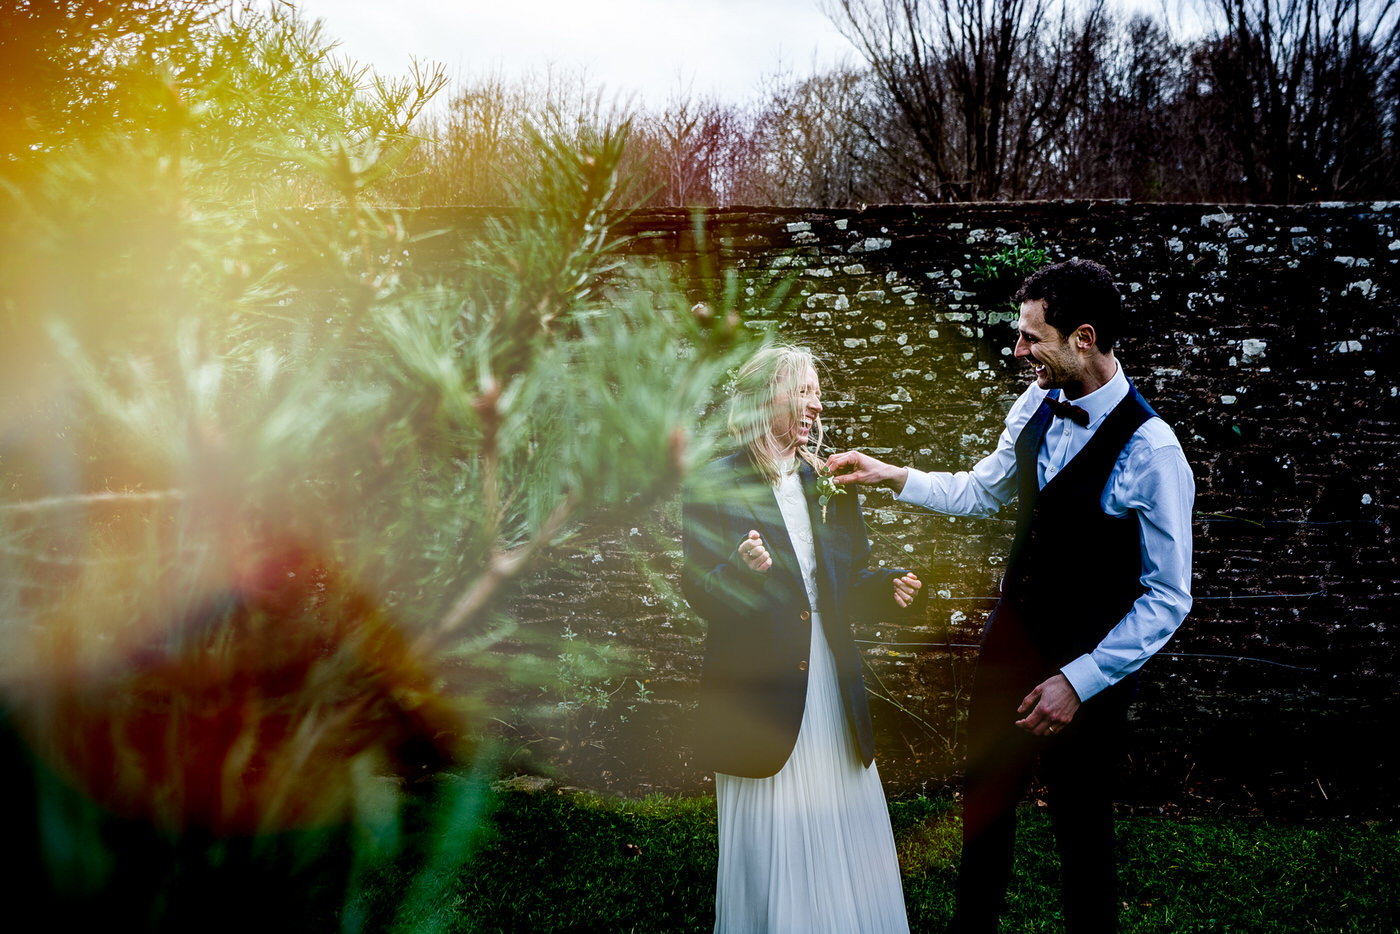 A wedding couple with lens glare